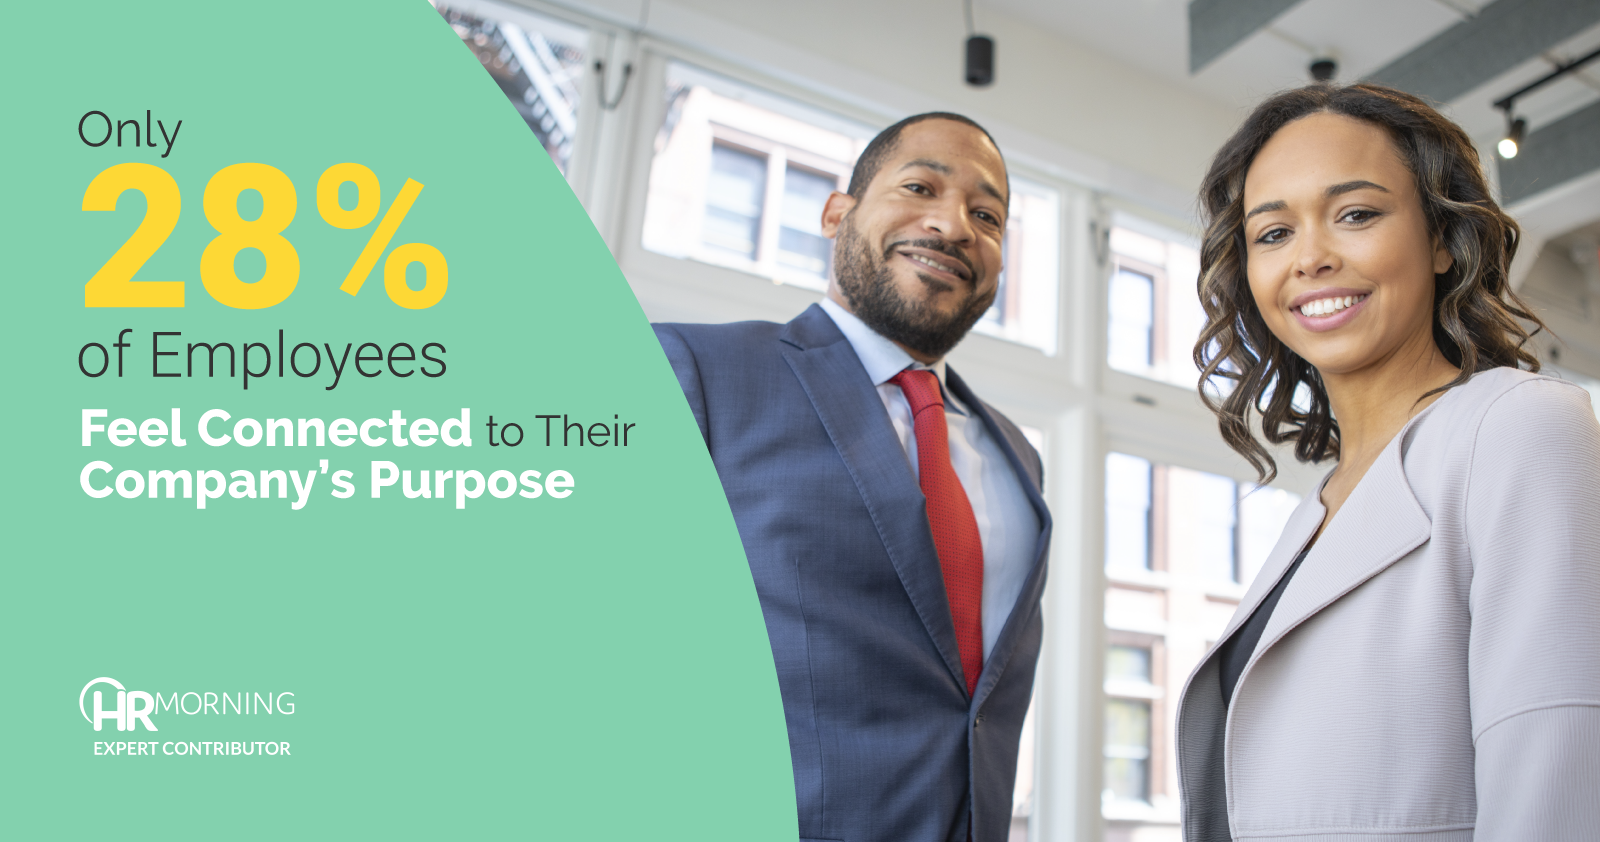 Only 28% of Employees Feel Connected to Their Company’s Purpose